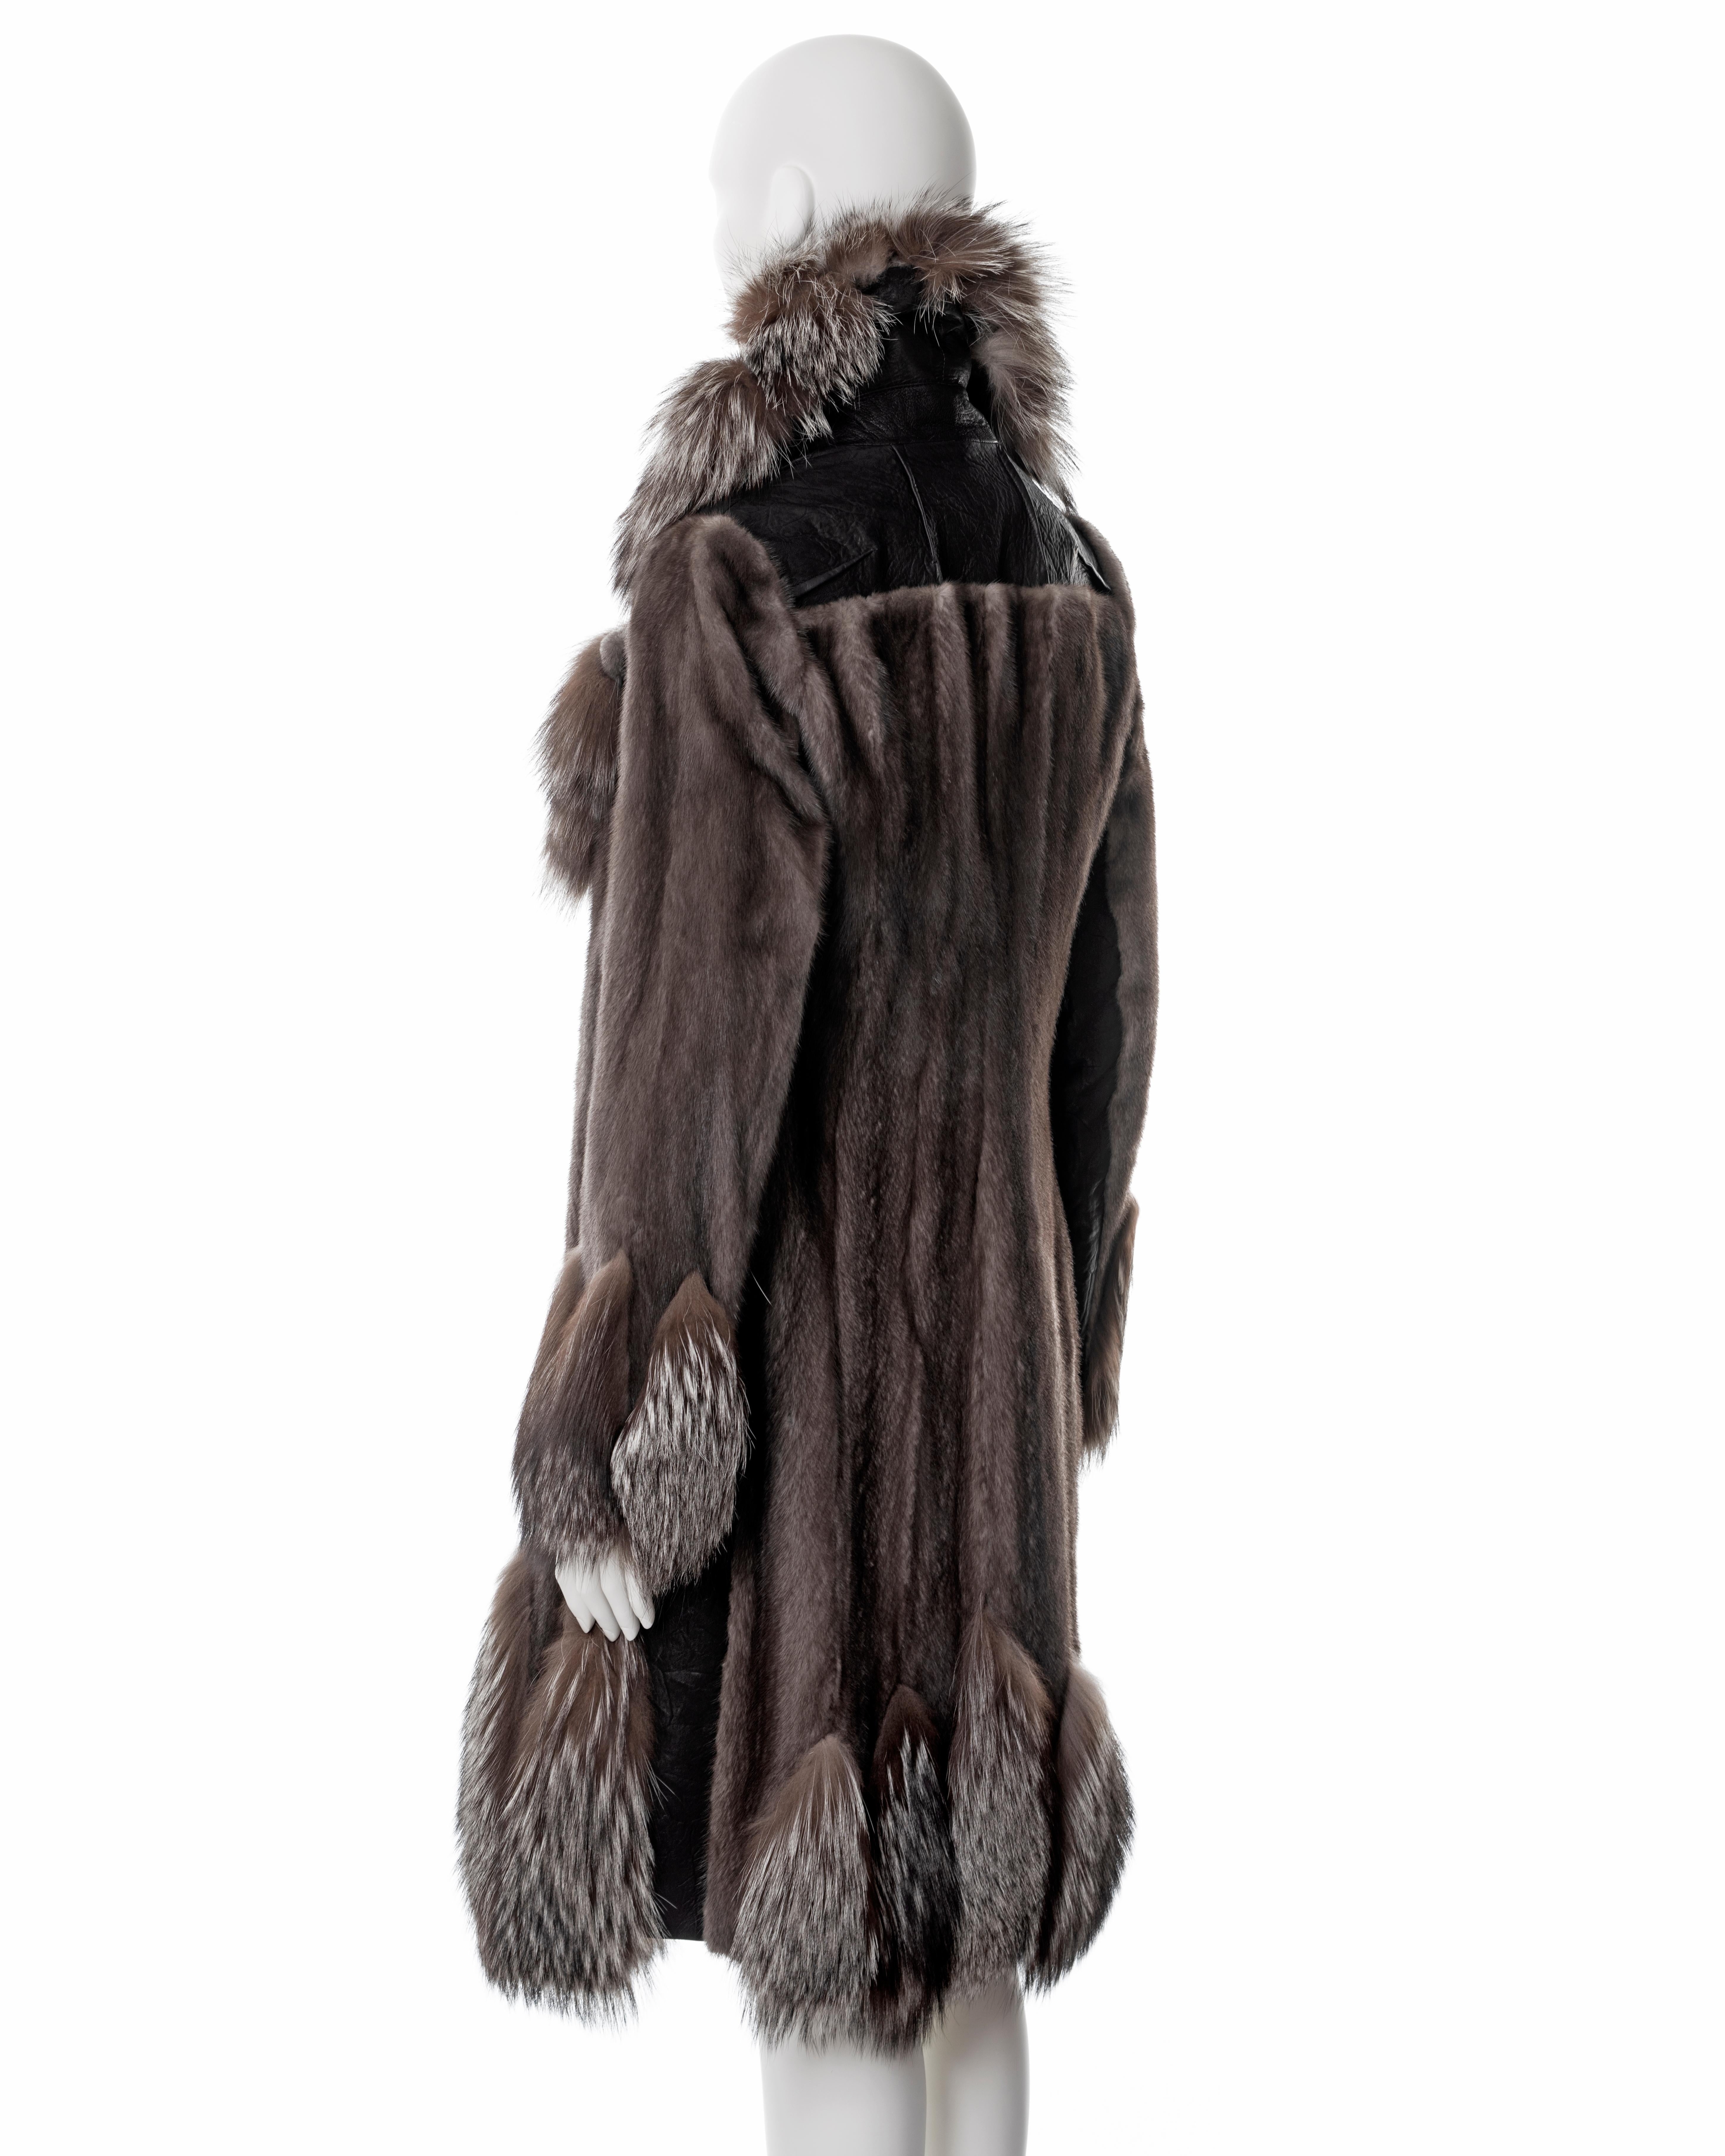 Christian Dior by John Galliano silverblue mink and silver fox fur coat, fw 2006 For Sale 1